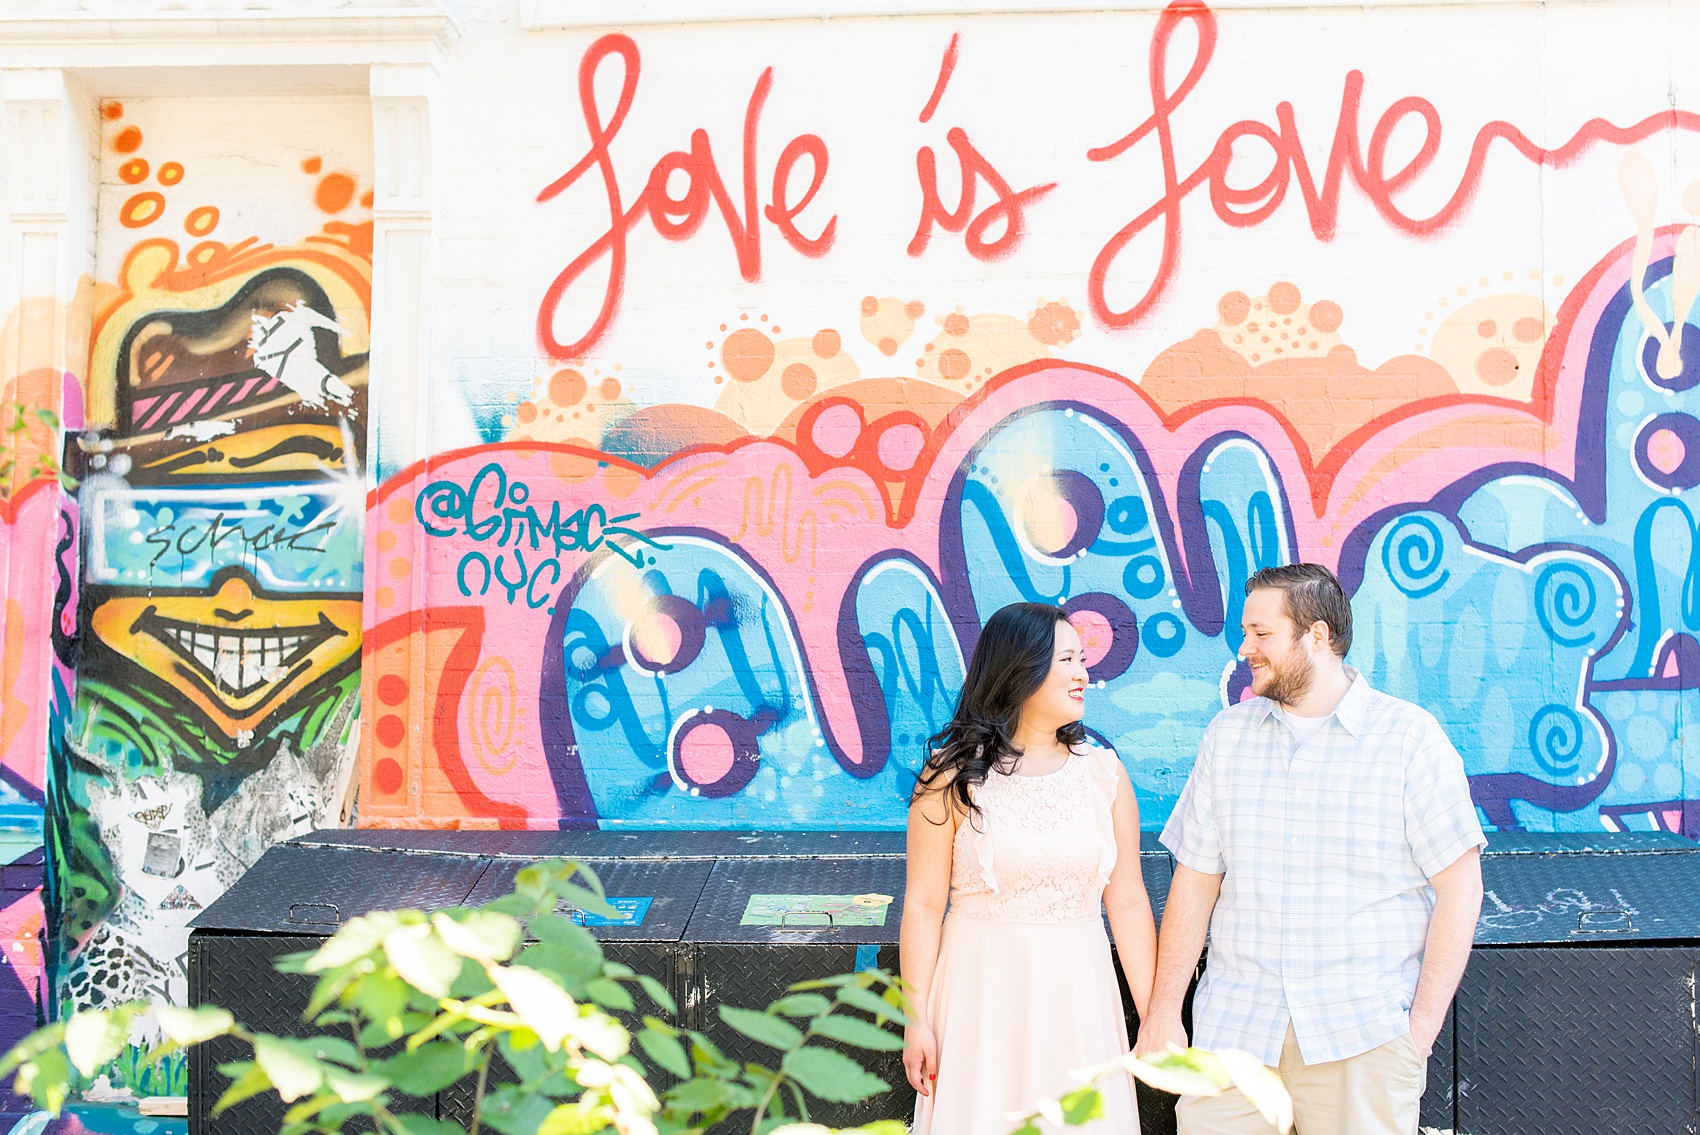 Lower East Side engagement photos in Manhattan by Mikkel Paige Photography. The "Love is Love" graffiti wall and bright mural were perfect for a few images! These creative pictures with an interracial couple in an urban environment in downtown NYC will have you wanting to see more than just this one photo...so be sure to click through to see the entire shoot! #mikkelpaige #EngagementPhotos #engagementshoot #EngagementPictures 